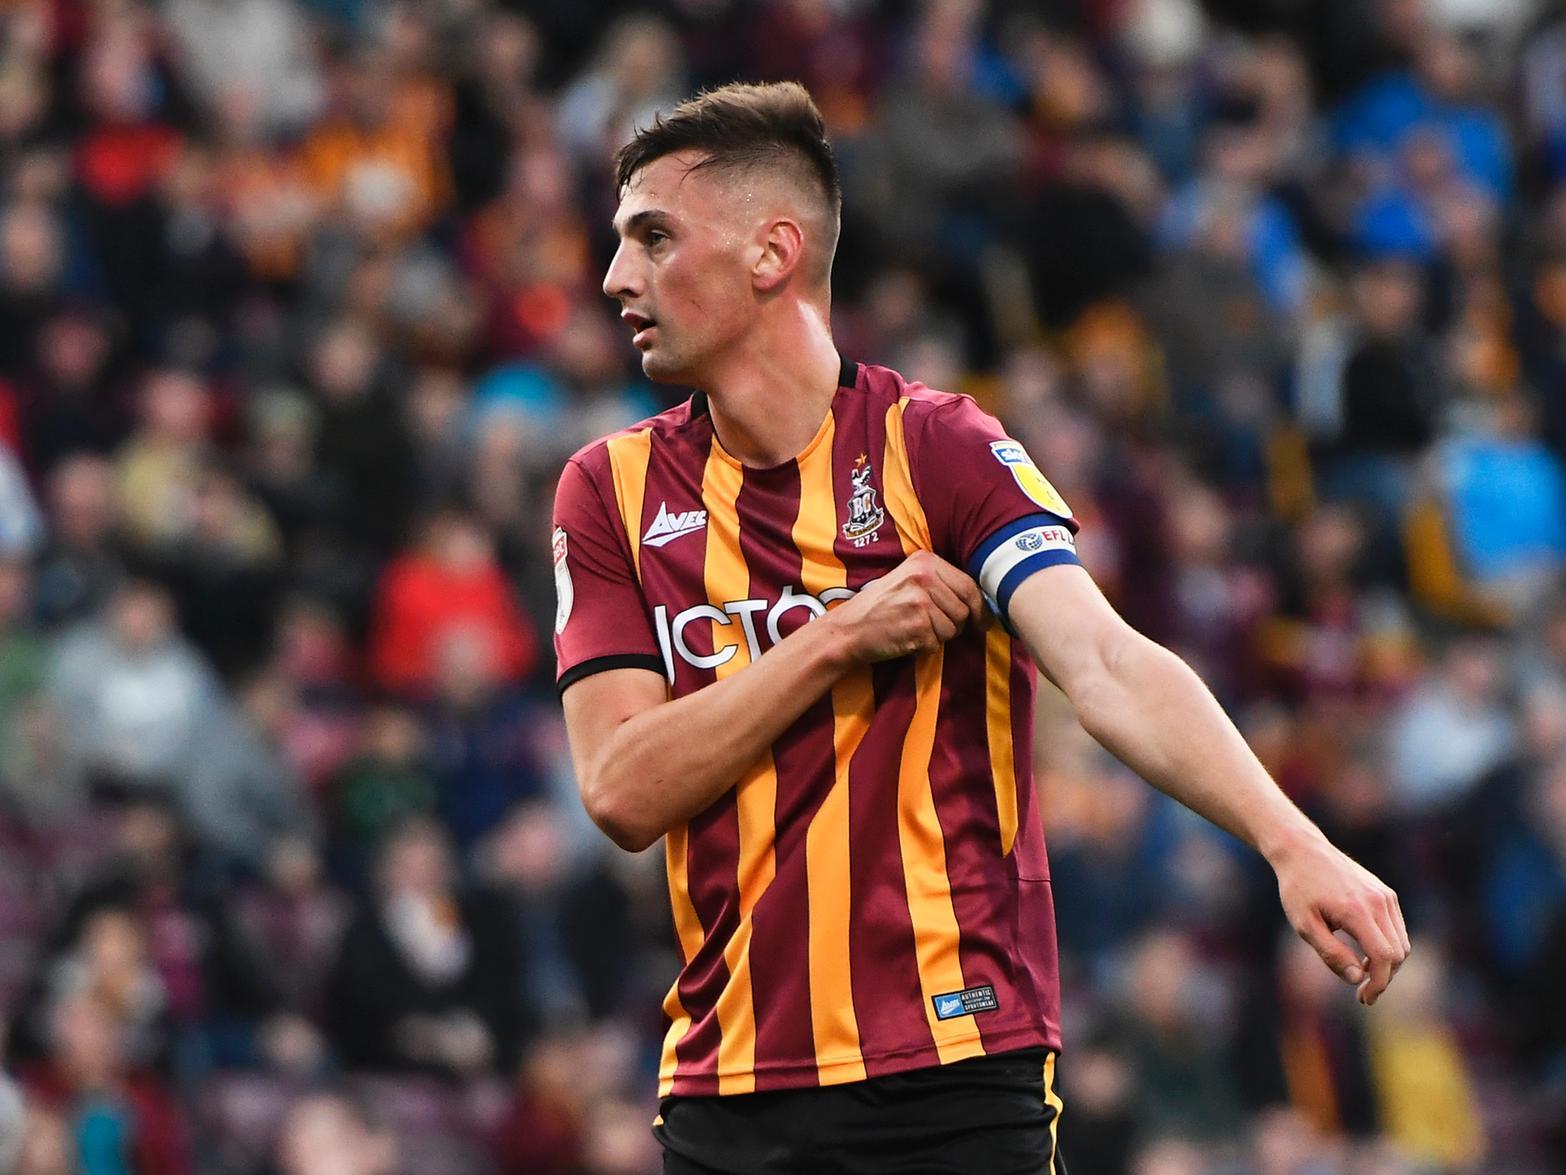 He's been one of their best players when called upon this season, and his side are making a firm push for automatic promotion. He's scored three goals, too.